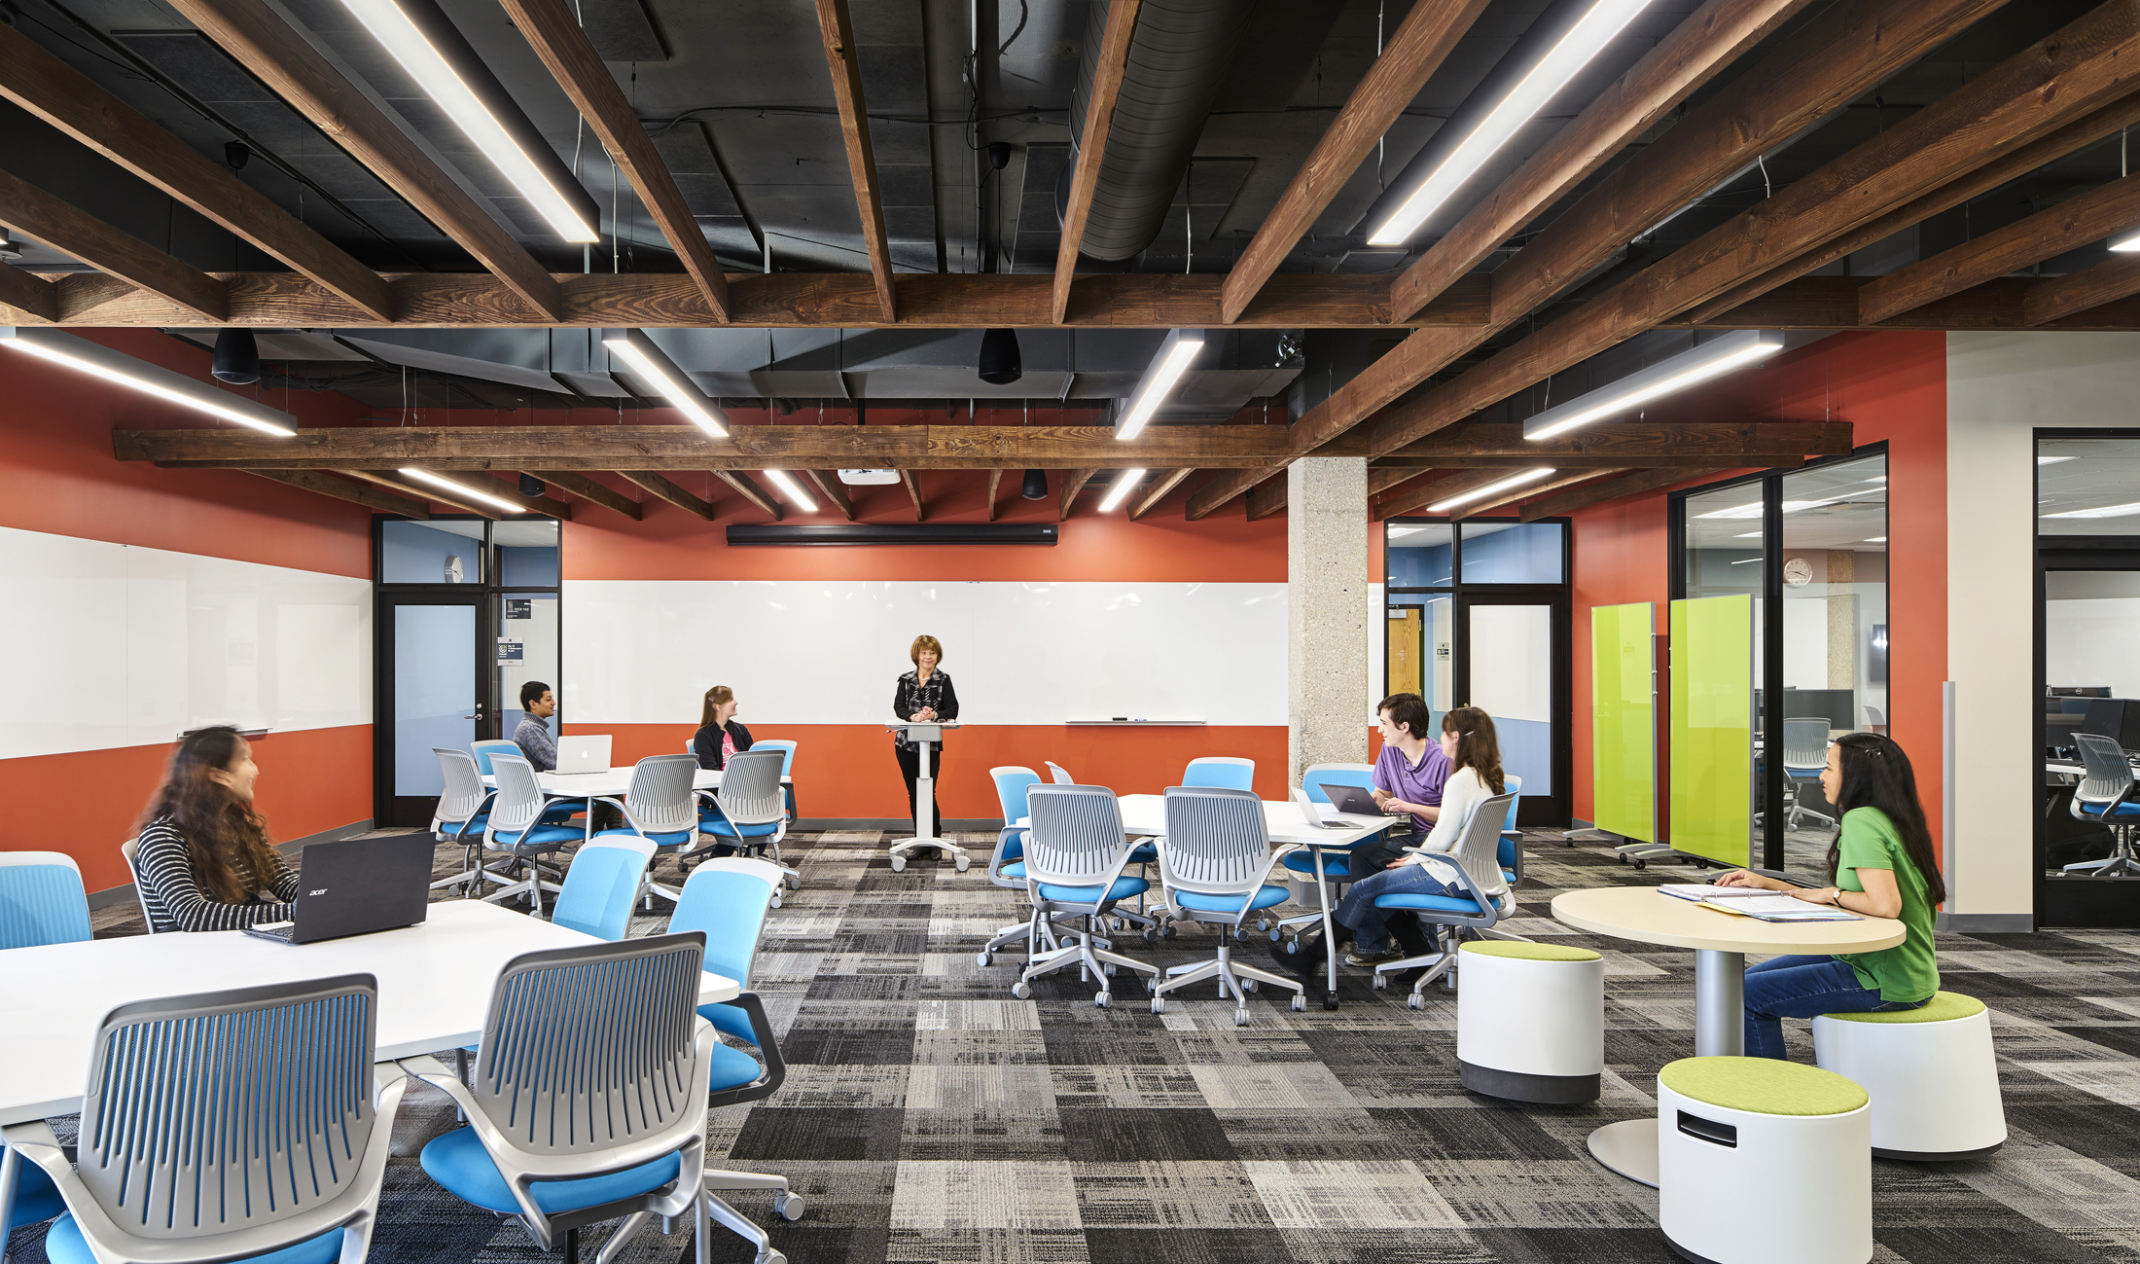 students learning in a room with flexible furniture and timber ceilings